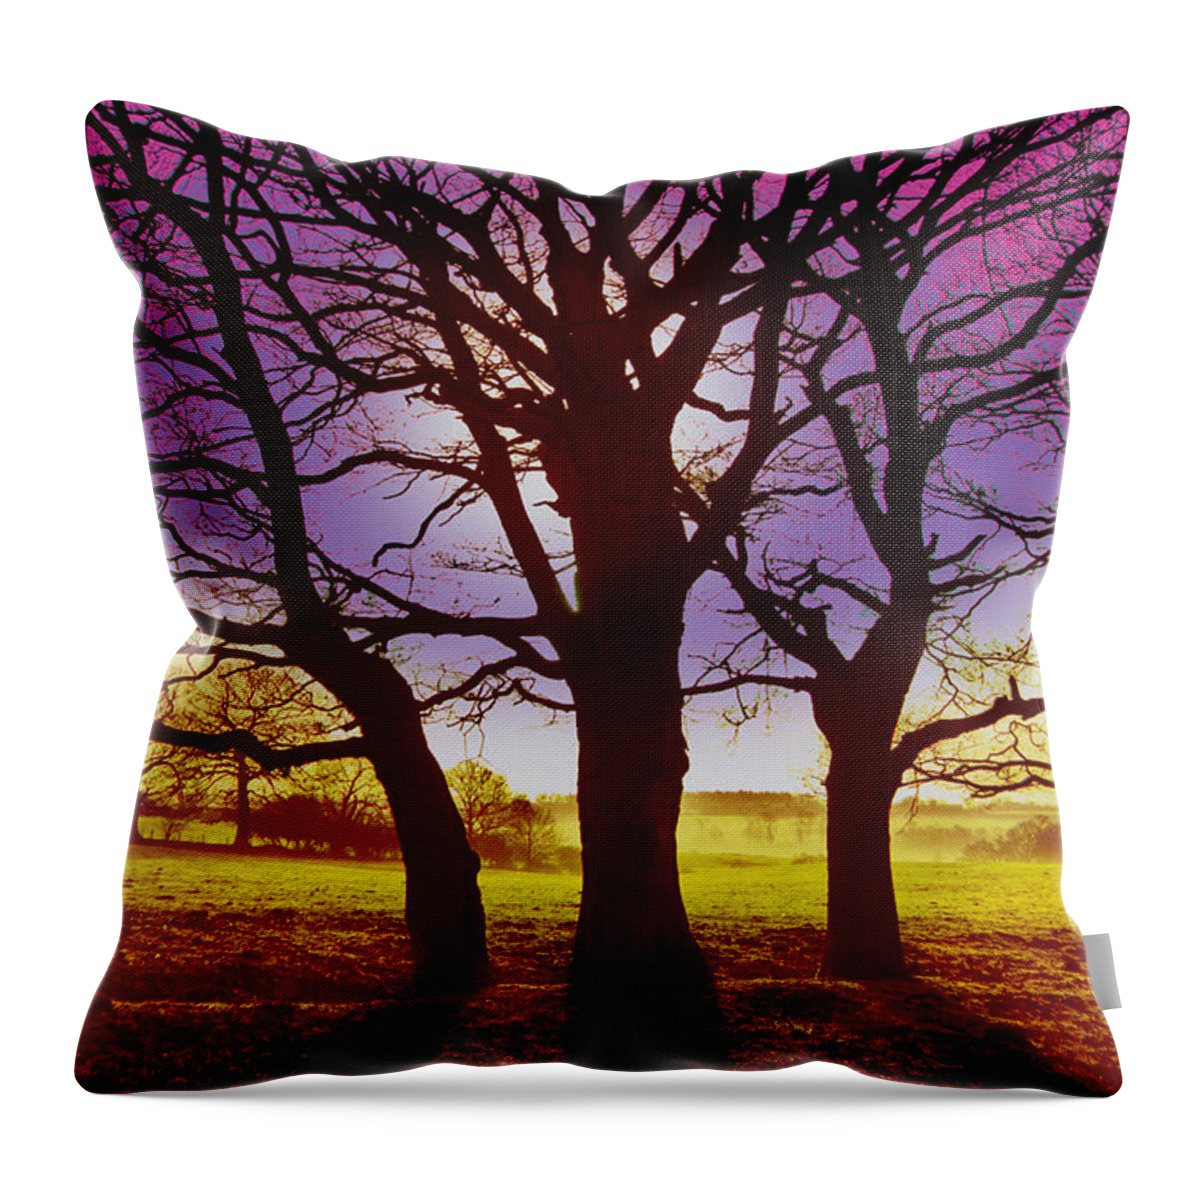 Landscape Throw Pillow featuring the digital art Three Trees by David Davies